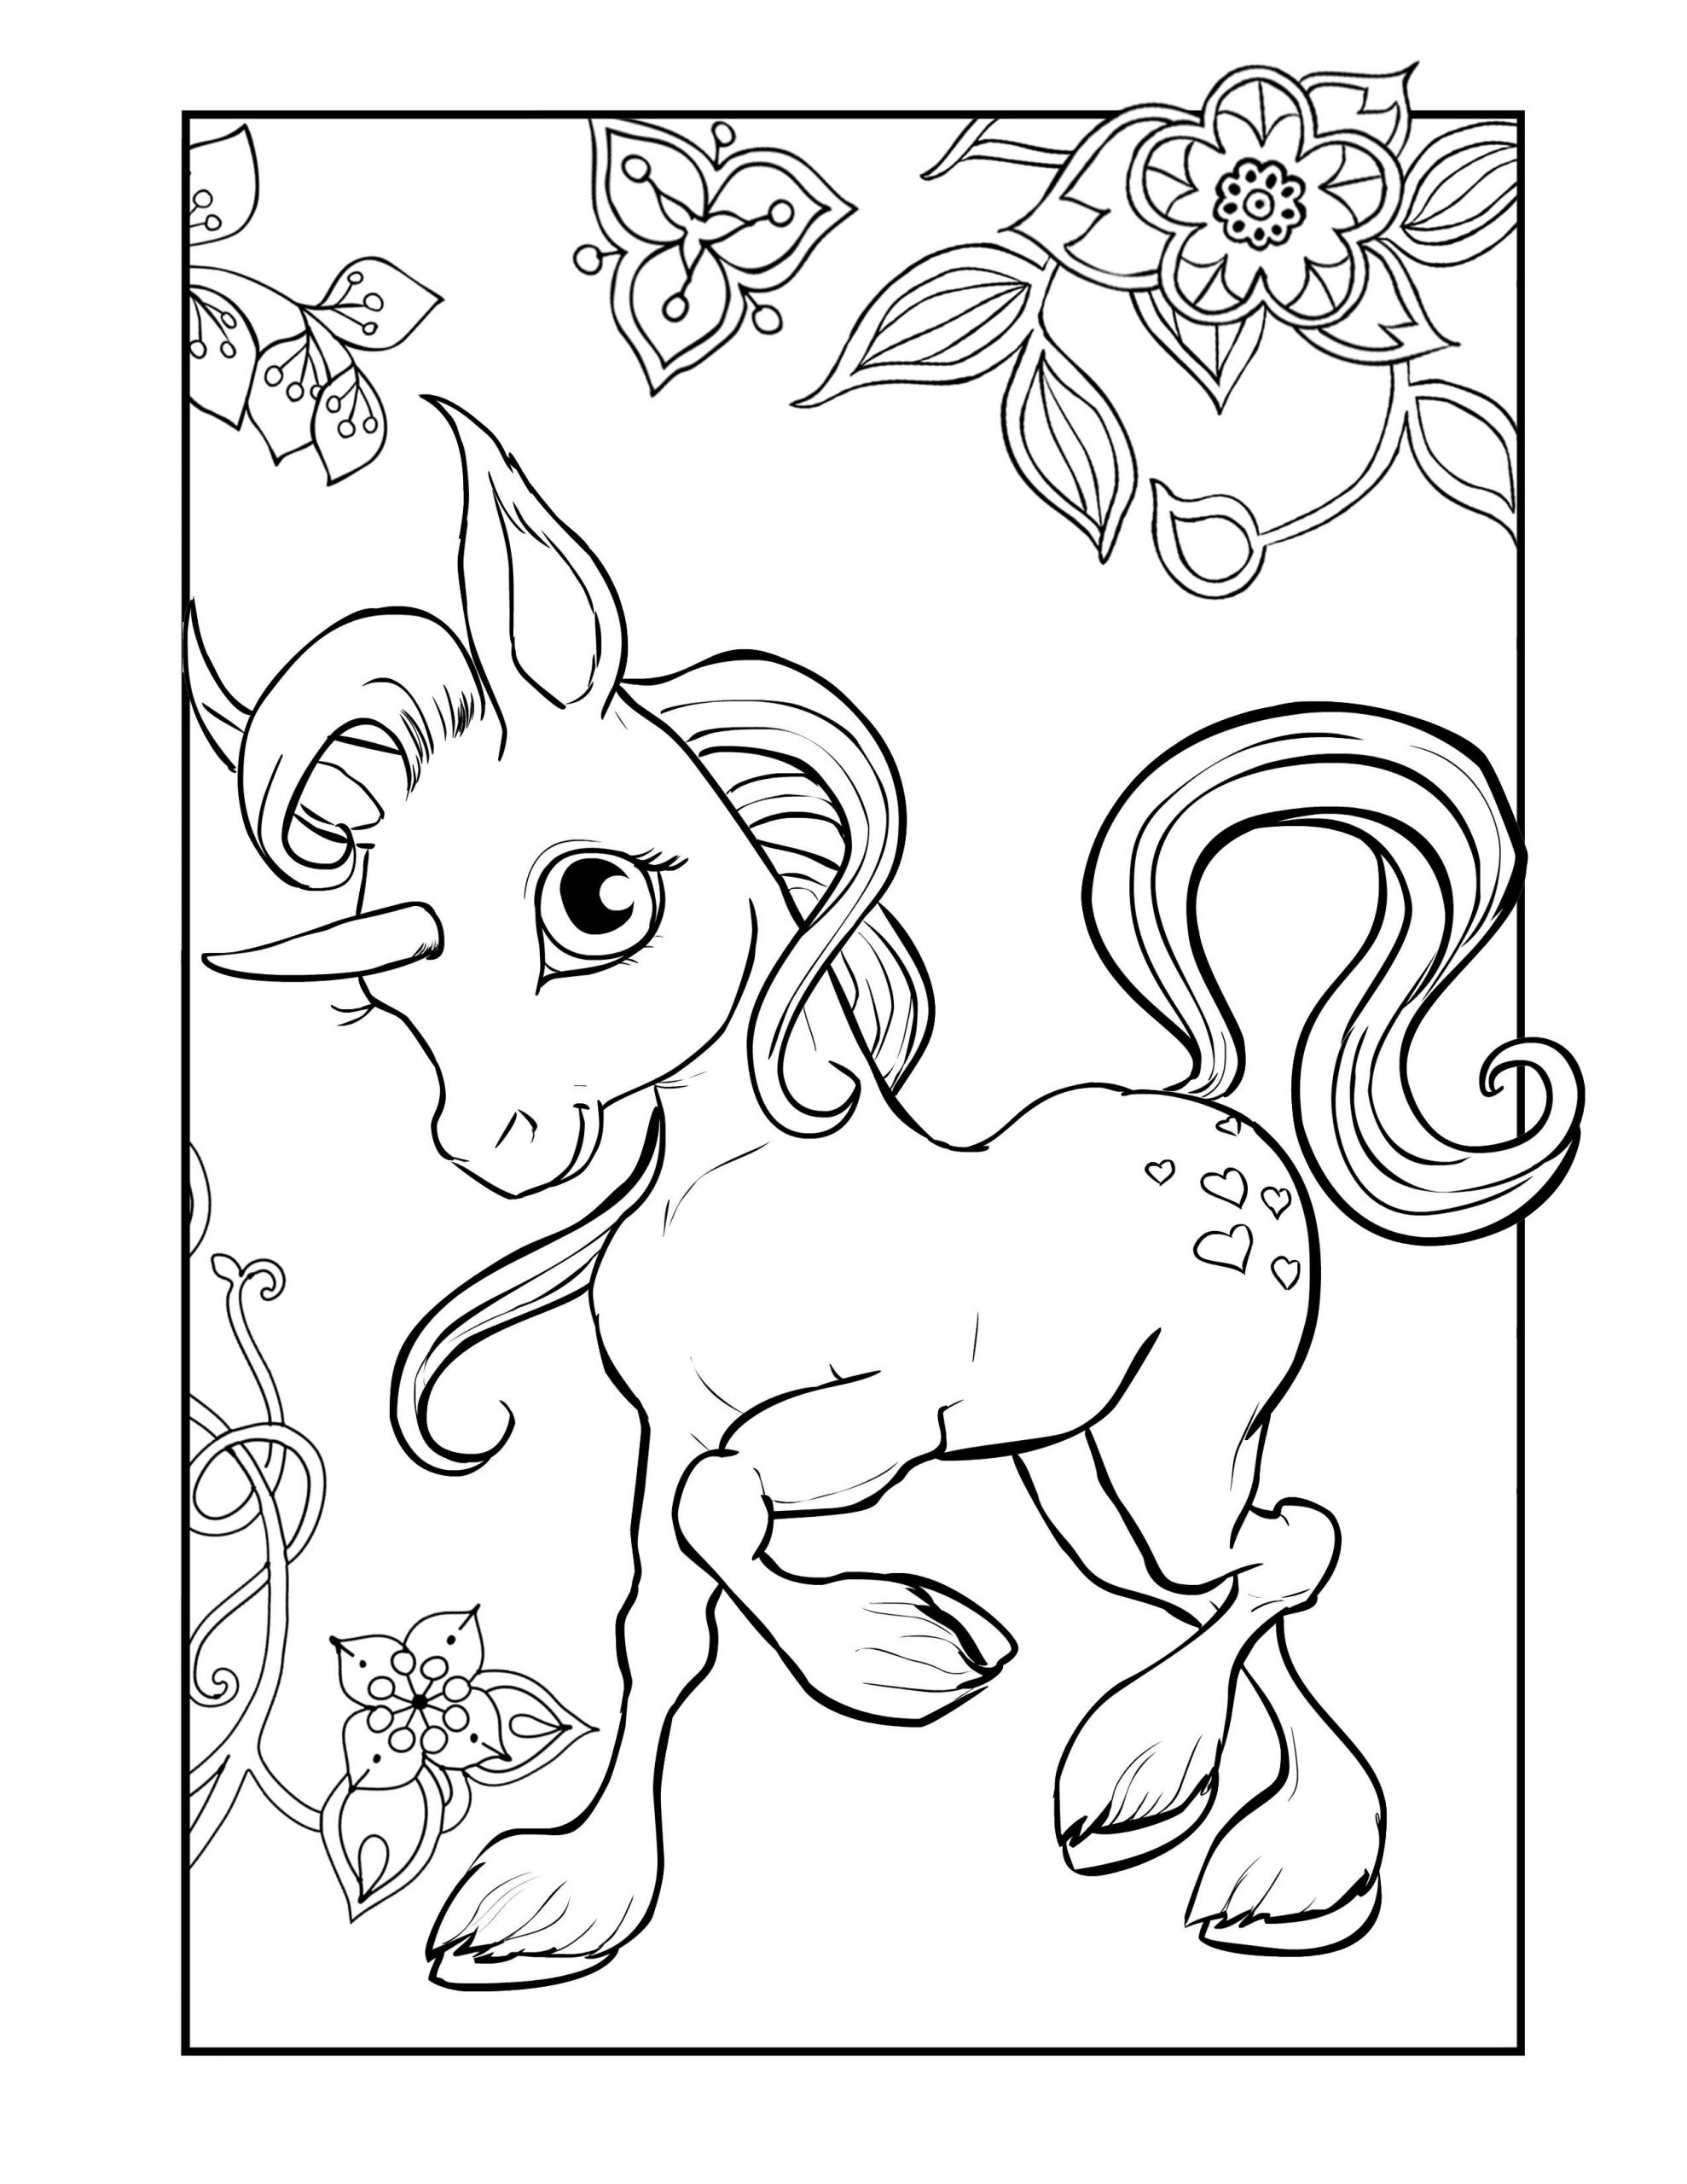 unicorn-girl-coloring-pages-printable